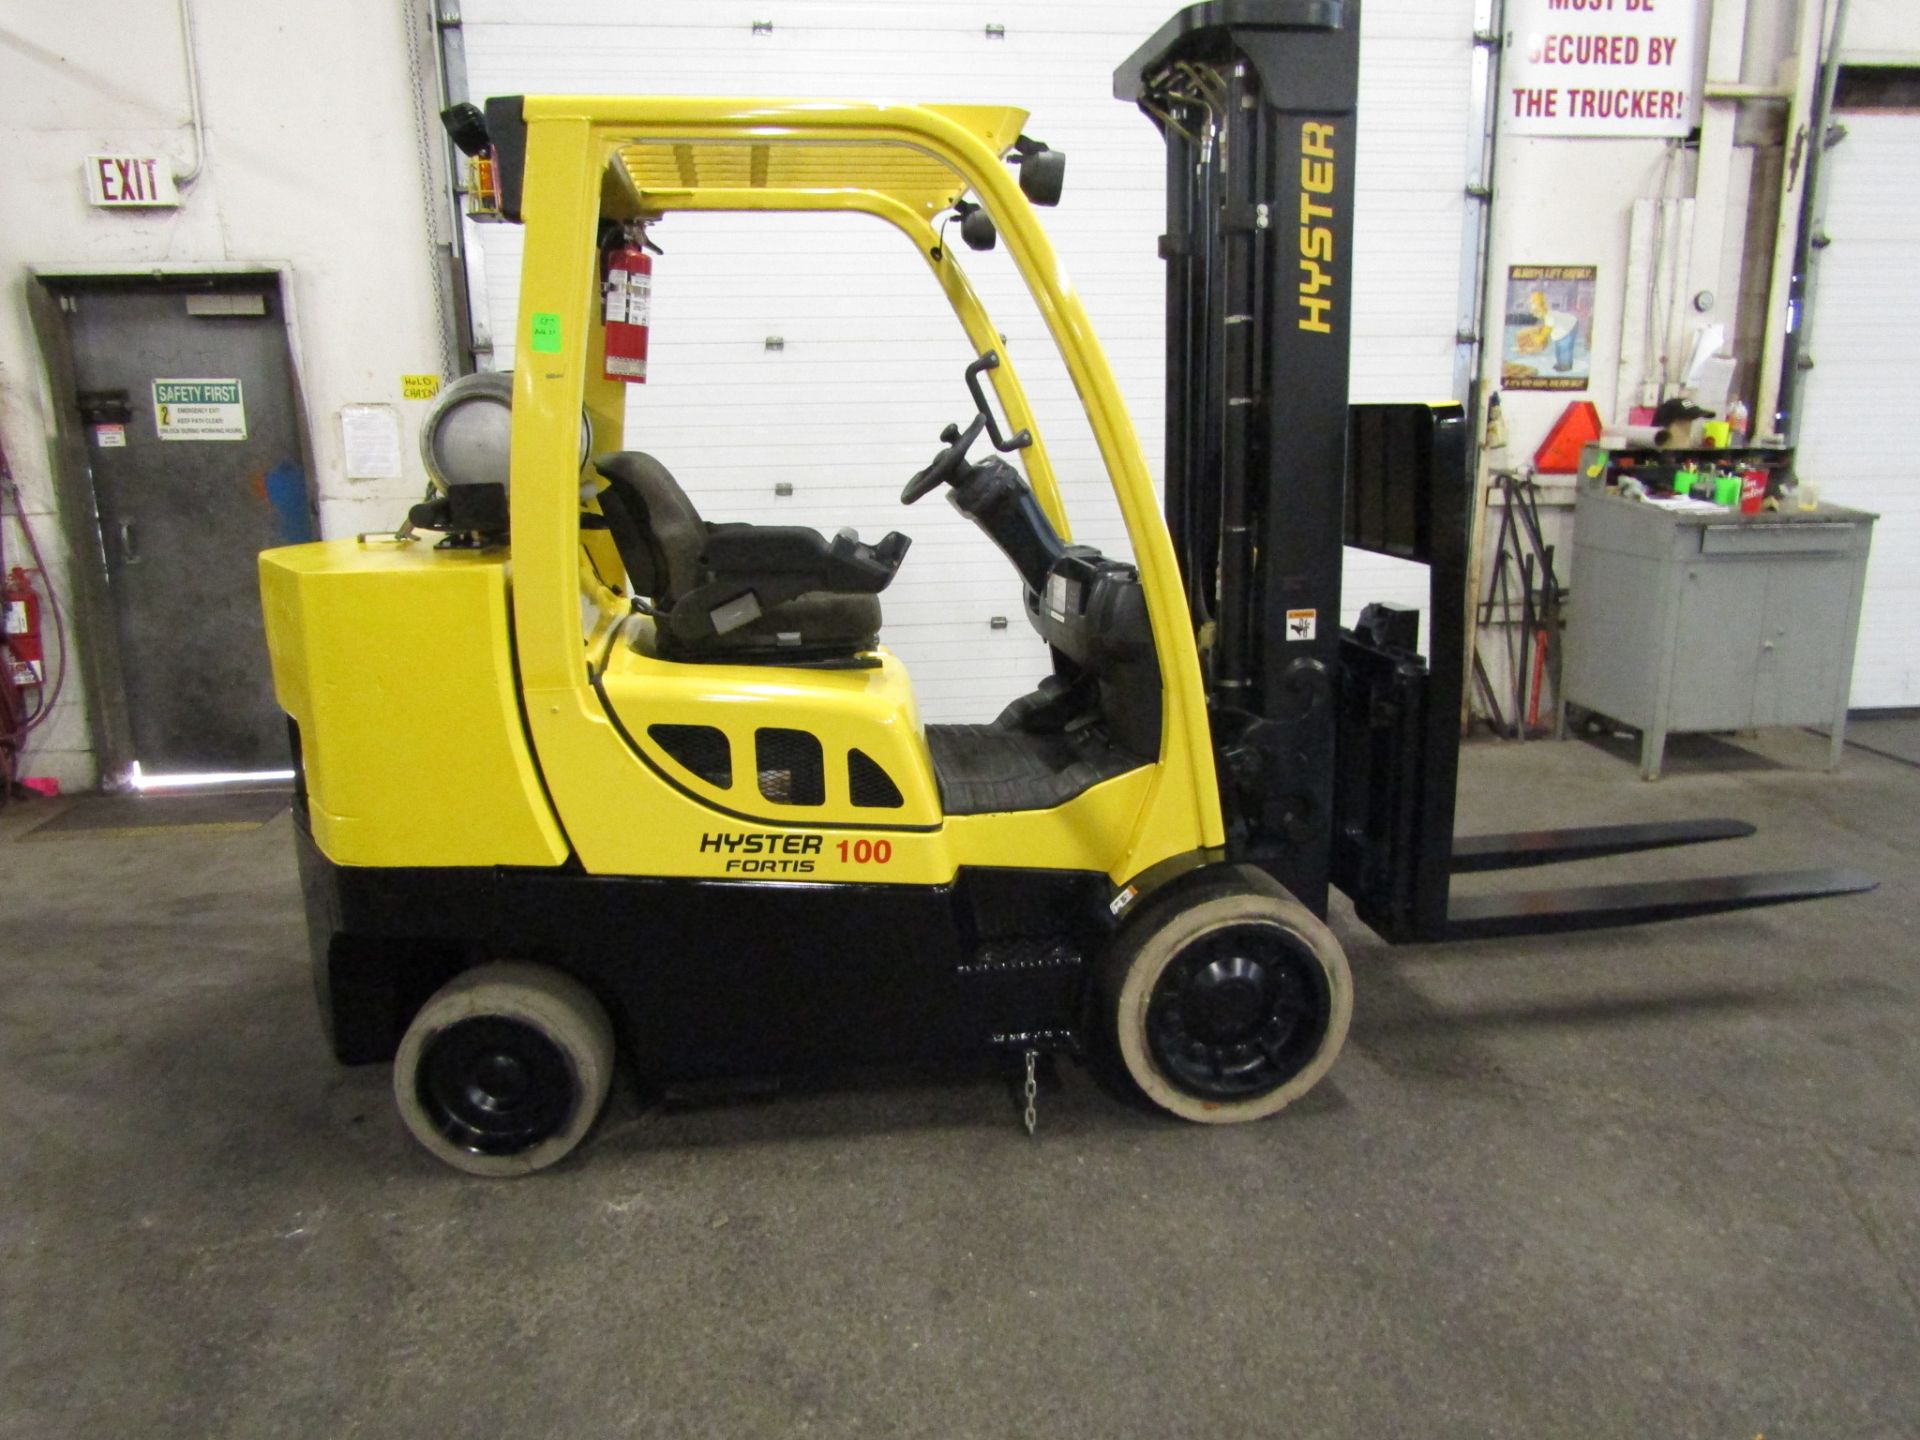 2008 Hyster 10000lbs capacity Forklift LPG (propane) with sideshift with 54" forks (no tank